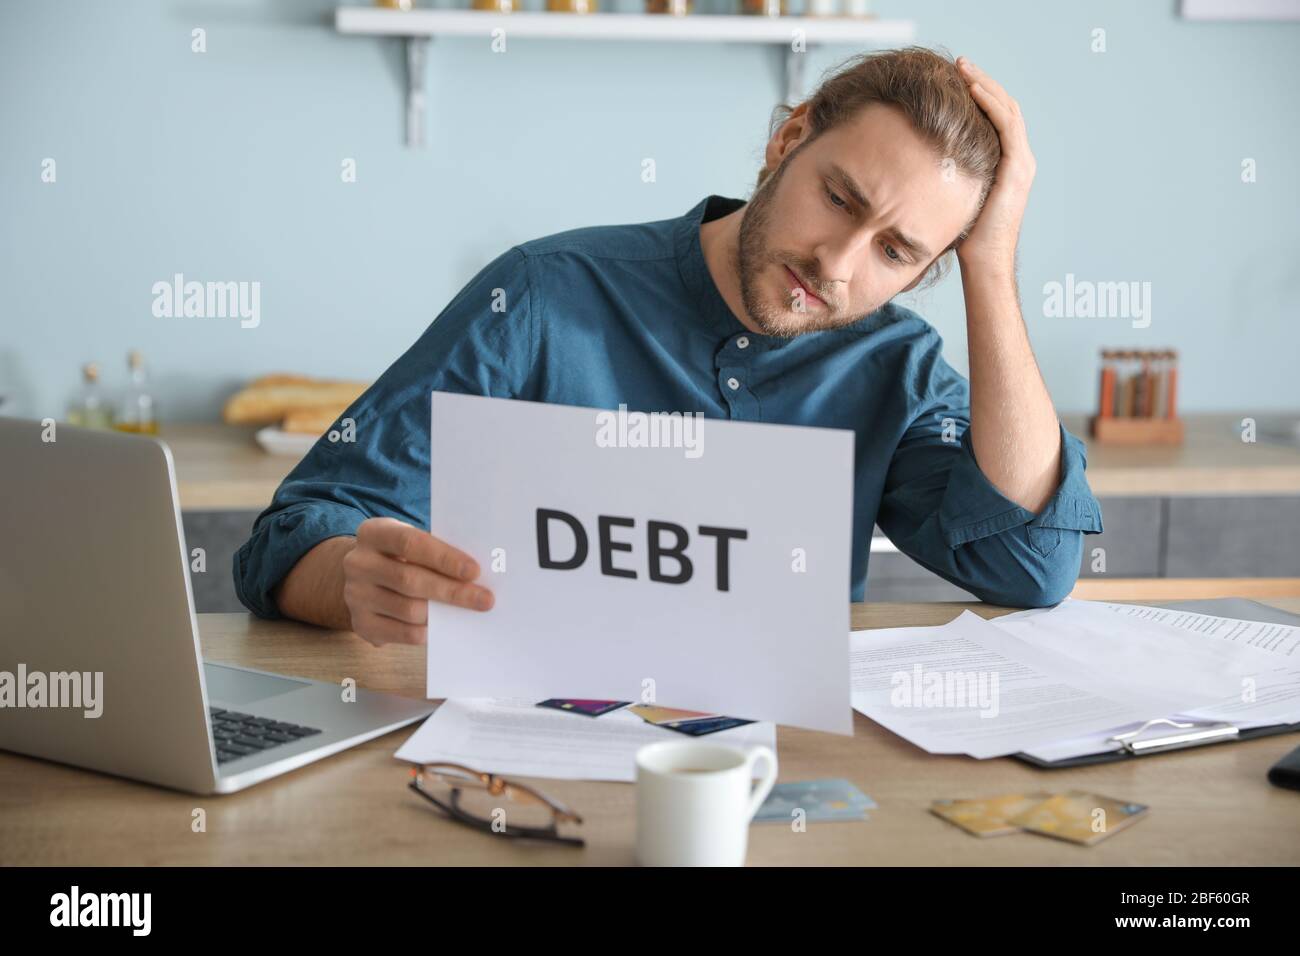 Worried young man in debt at home Stock Photo